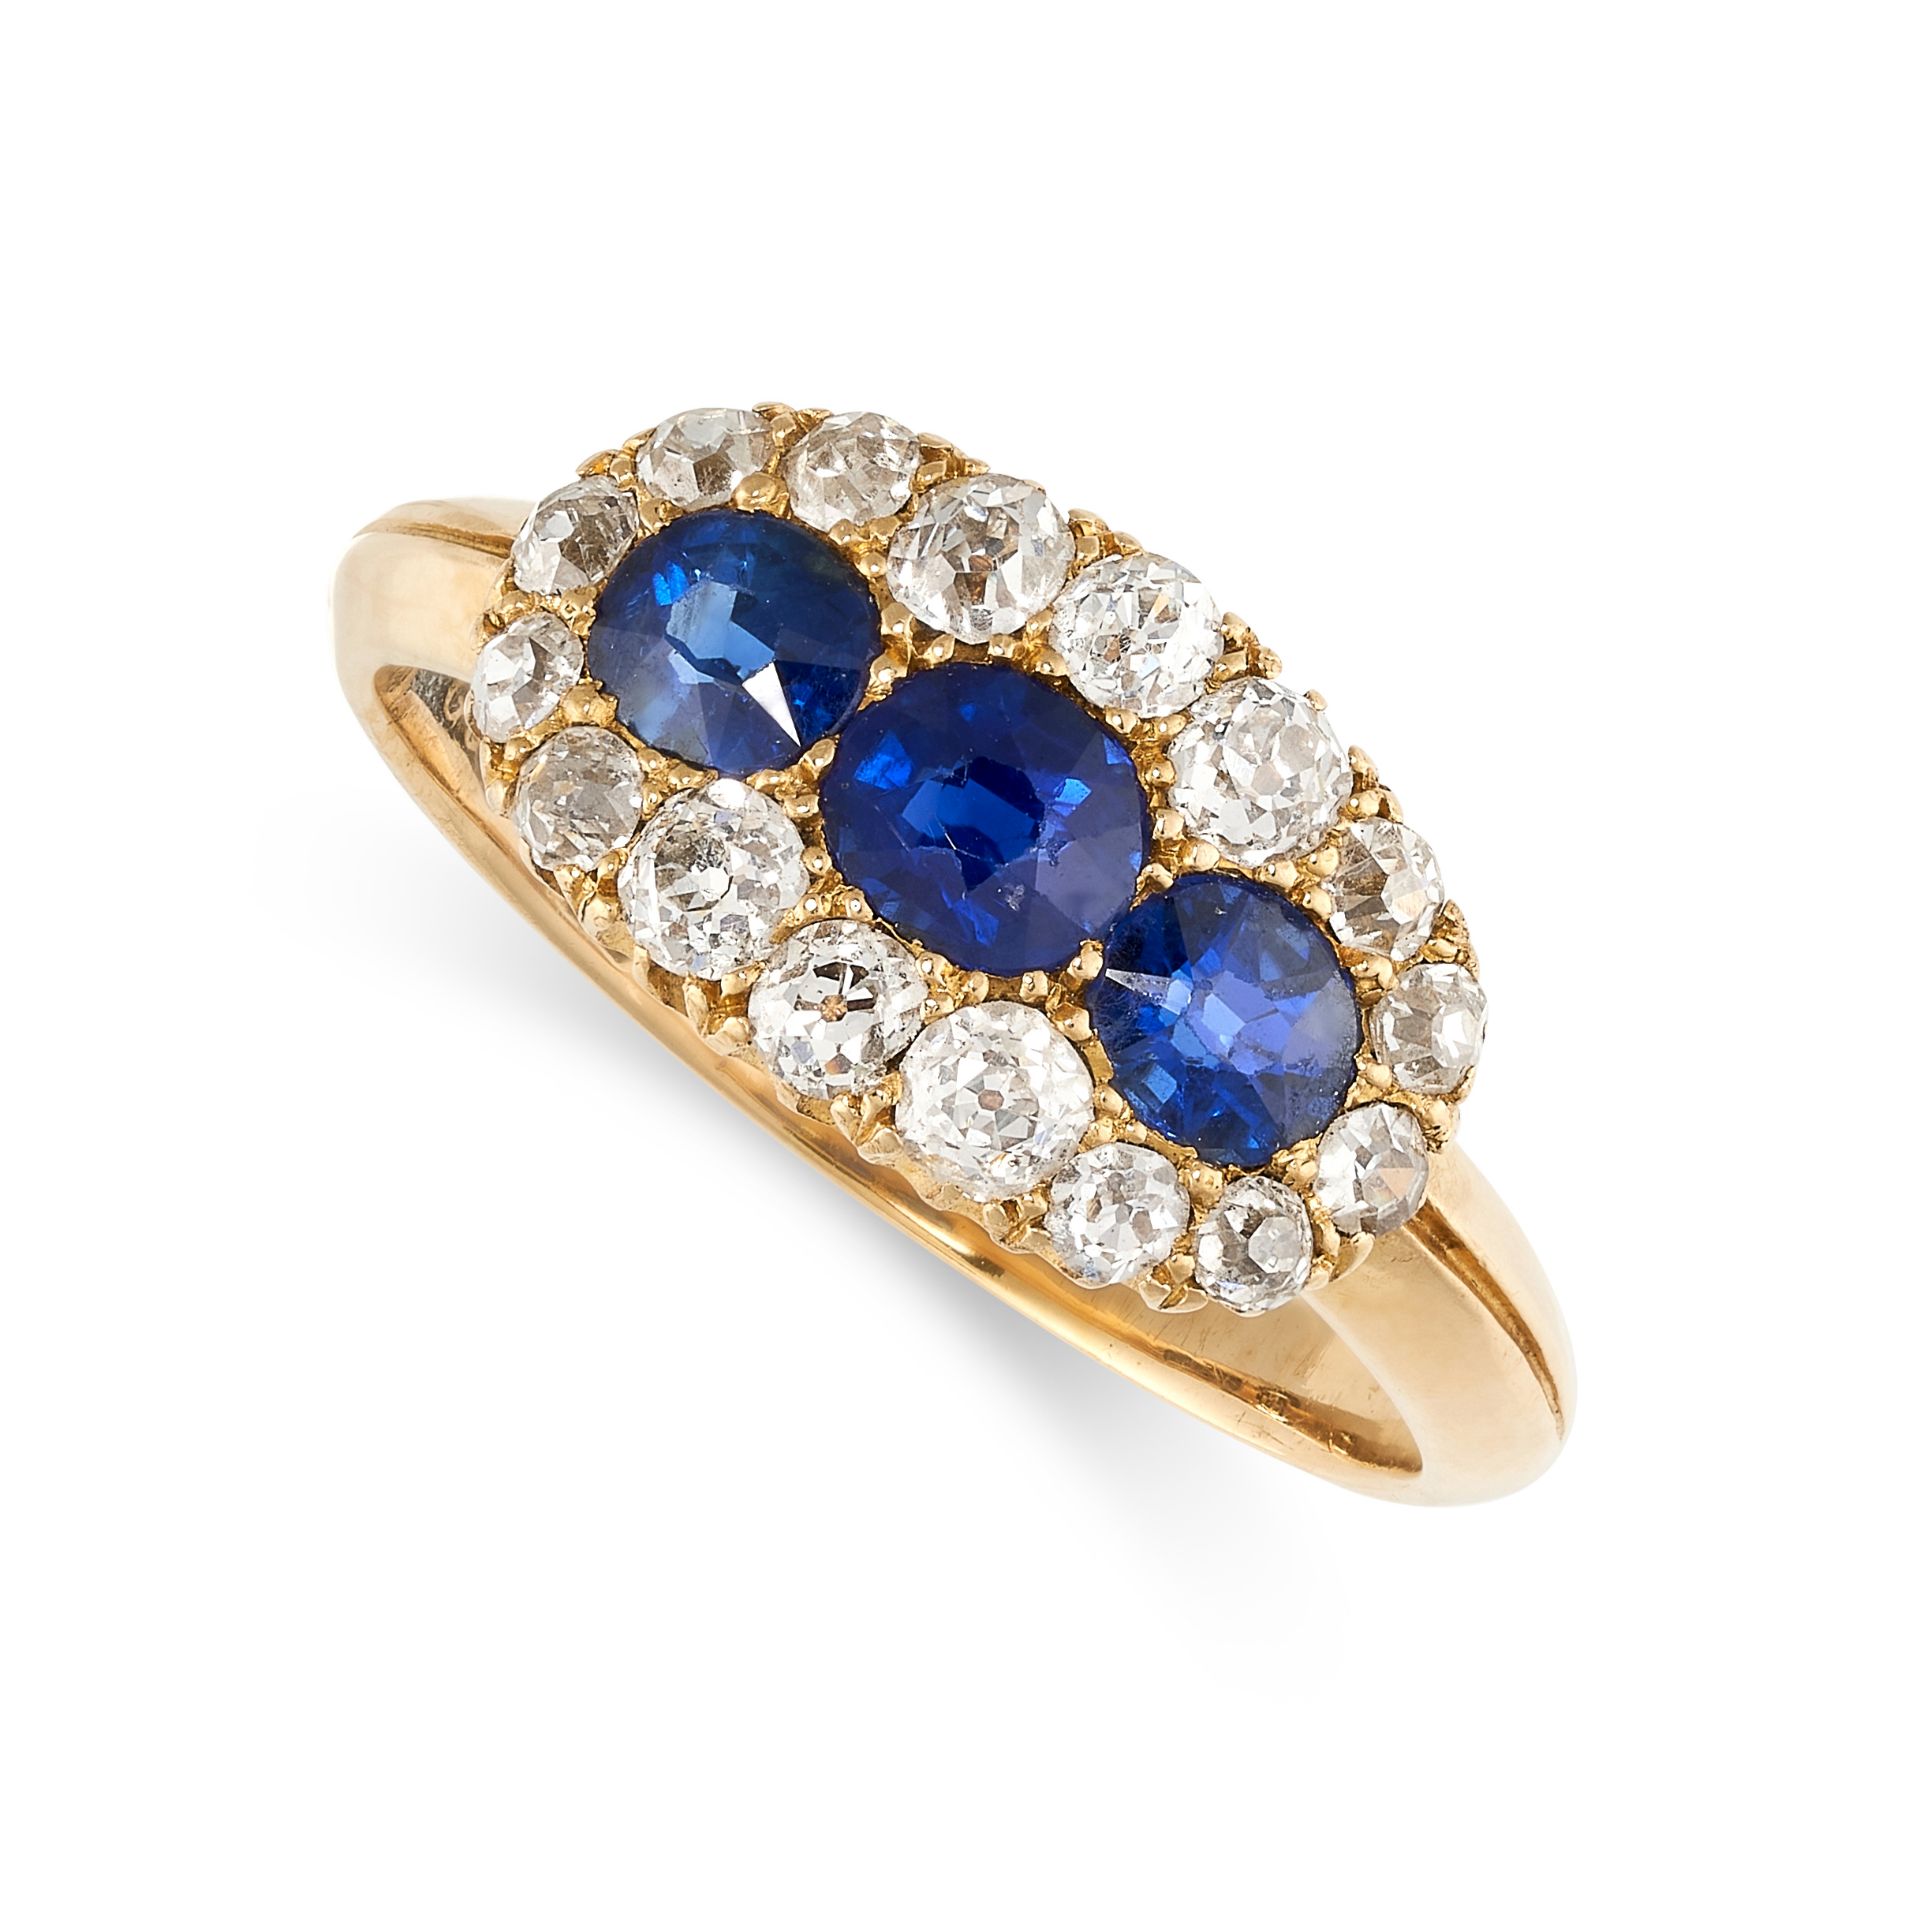 NO RESERVE - AN ANTIQUE SAPPHIRE AND DIAMOND DRESS RING in 18ct yellow gold, set with a trio of